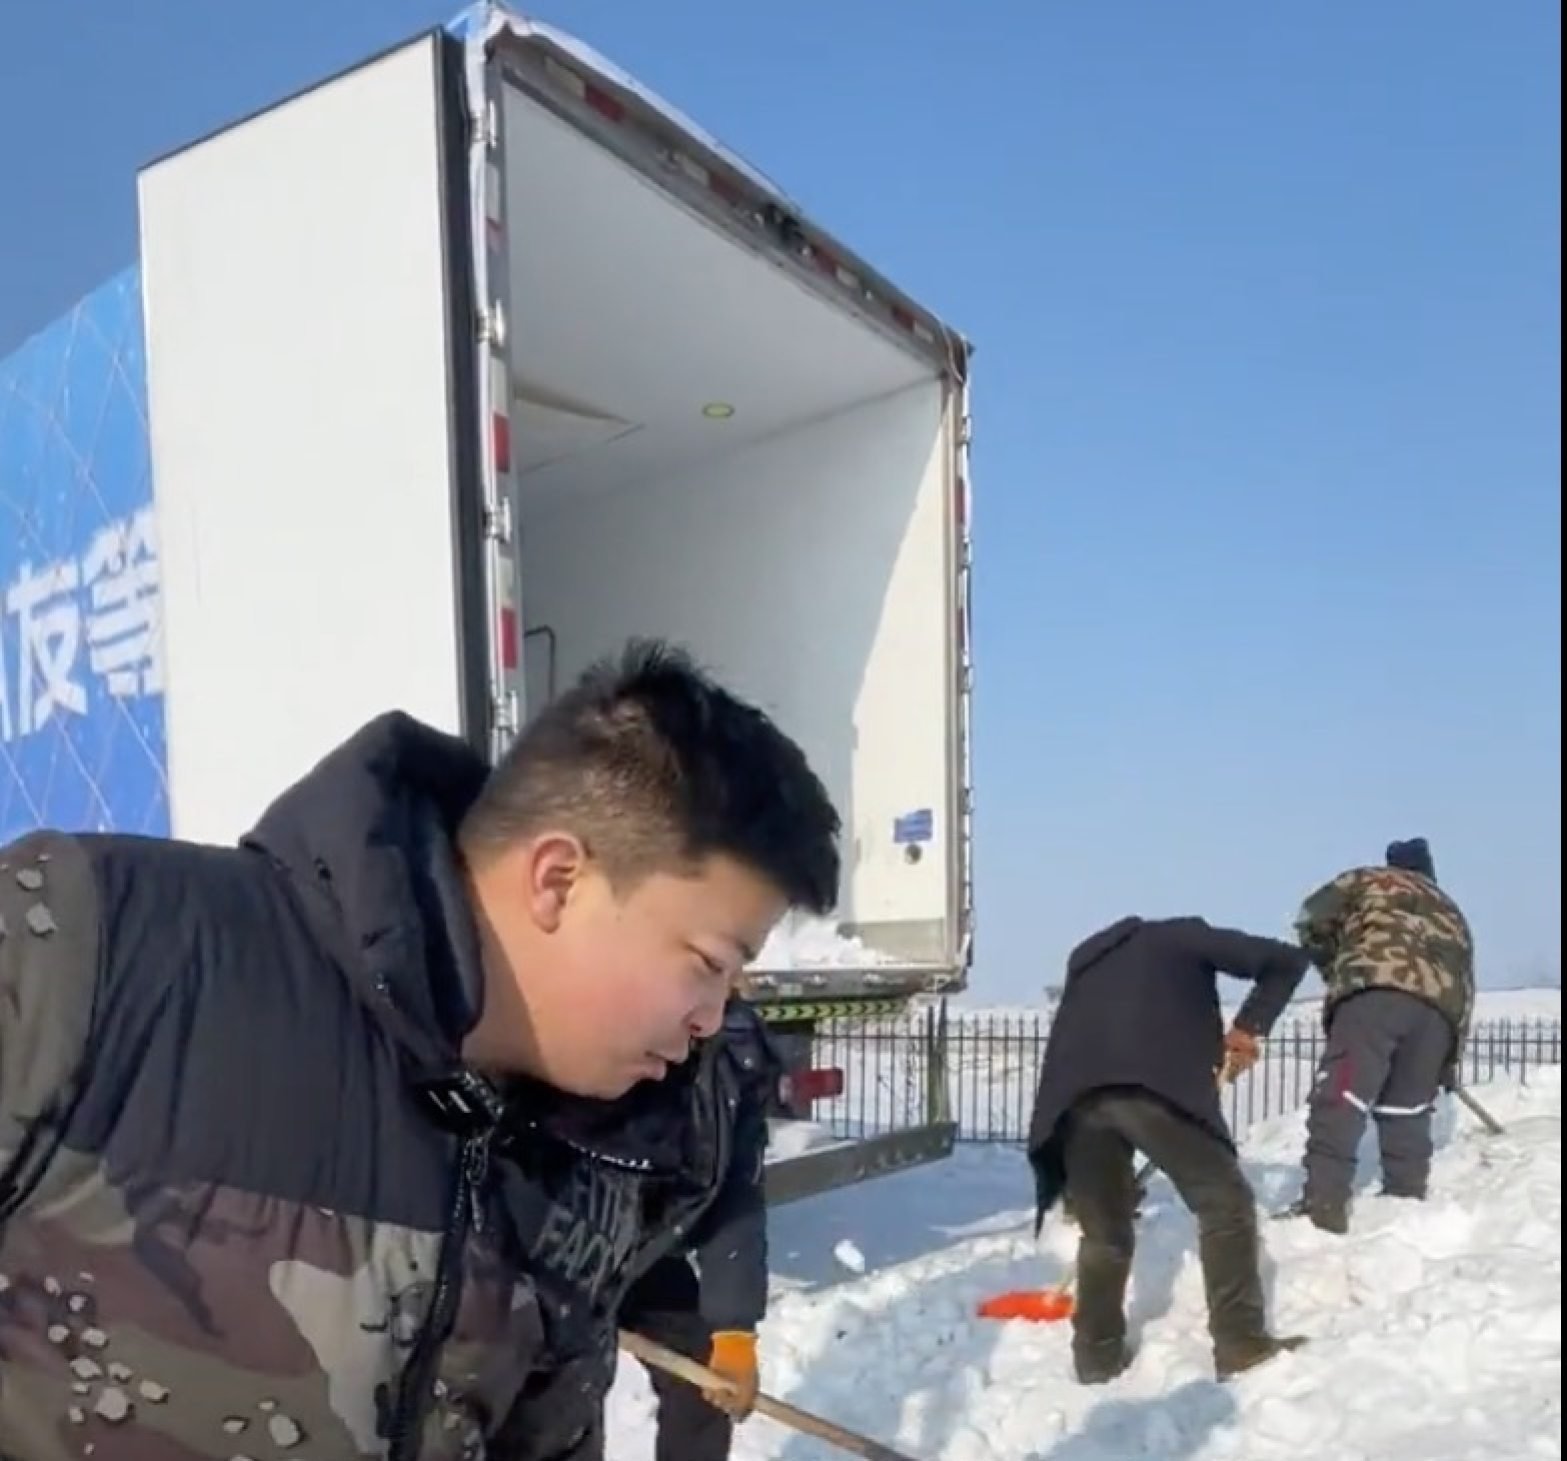 The snow was shovelled into trucks in northern China and driven to the children in the south of the country. Photo: Douyin